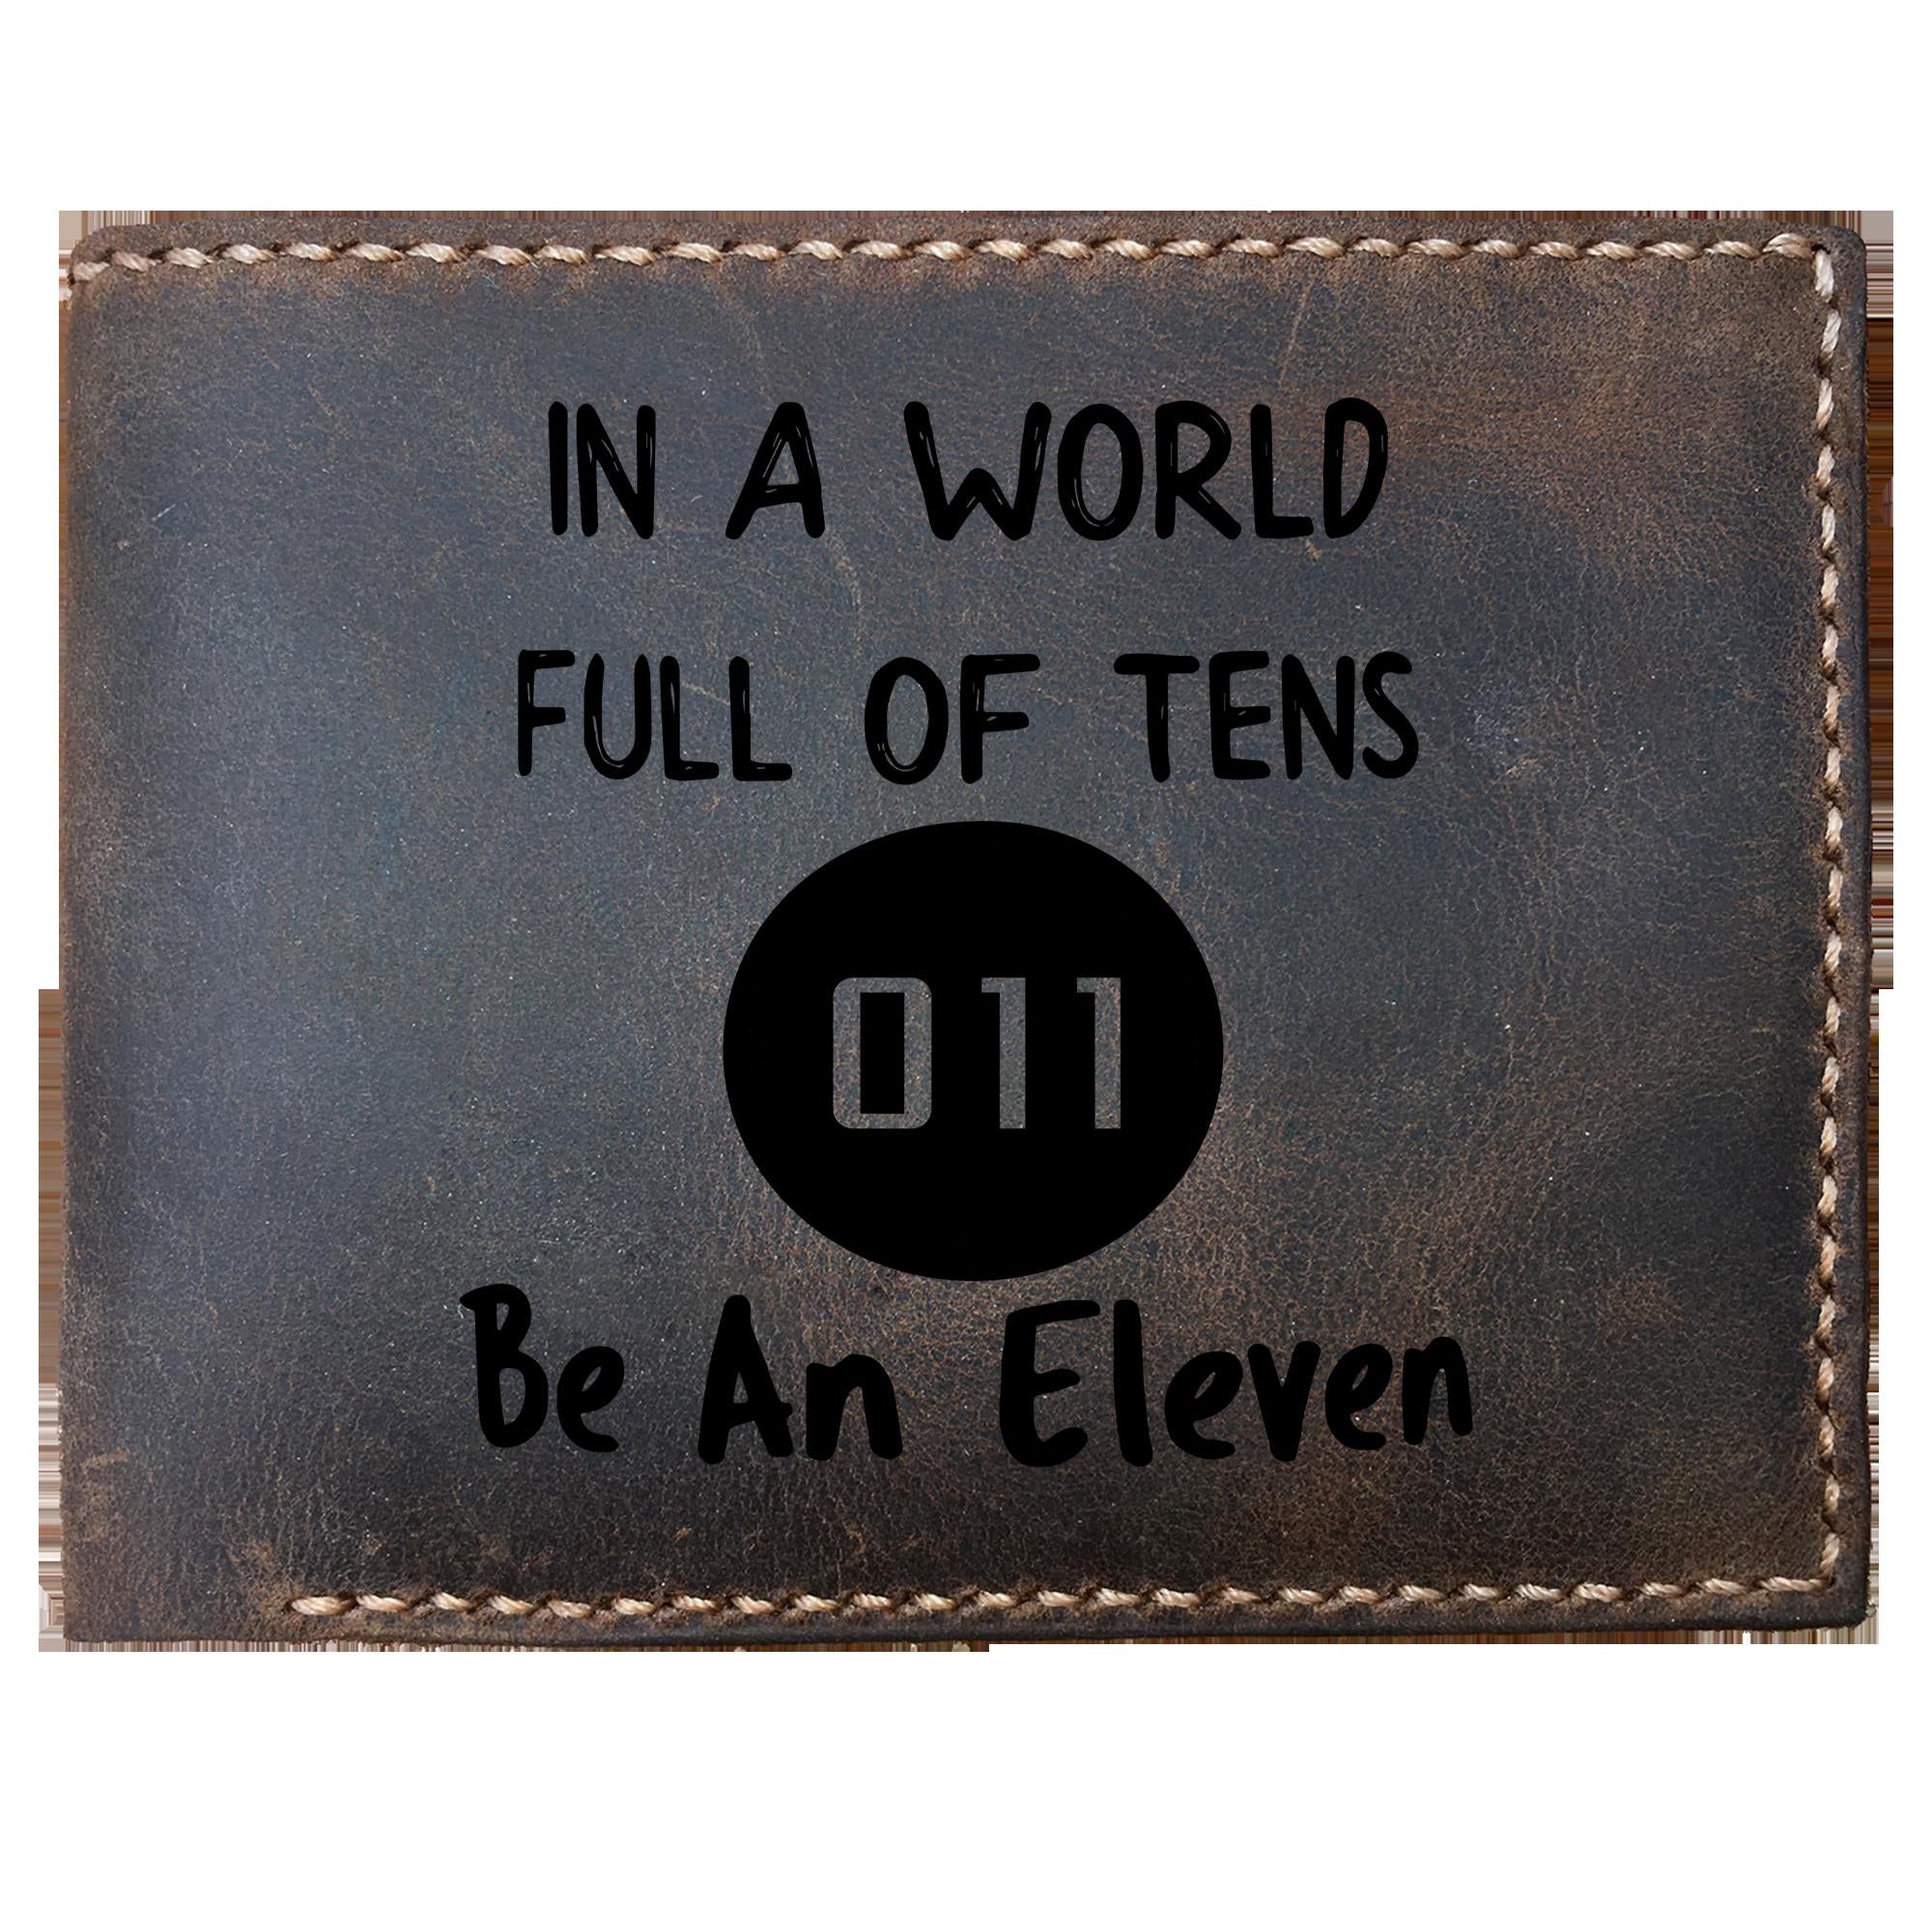 Skitongifts Funny Custom Laser Engraved Bifold Leather Wallet For Men, In A World Full Of Tens 011 Be An Eleven